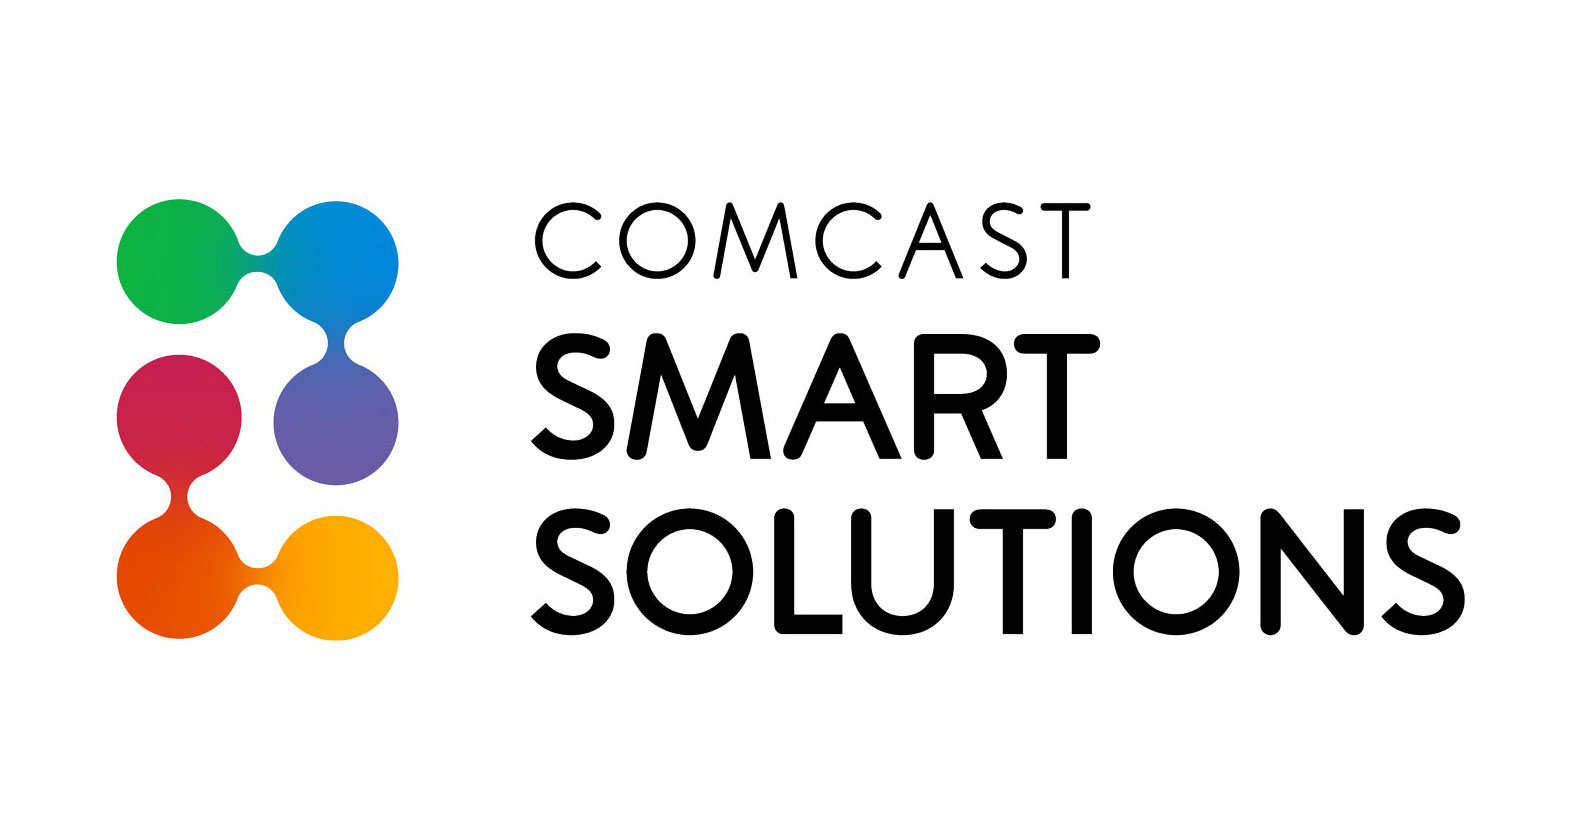 Town of Braselton Teams Up with Comcast Smart Solutions to Enhance Safety and Security in Parks and Recreational Areas